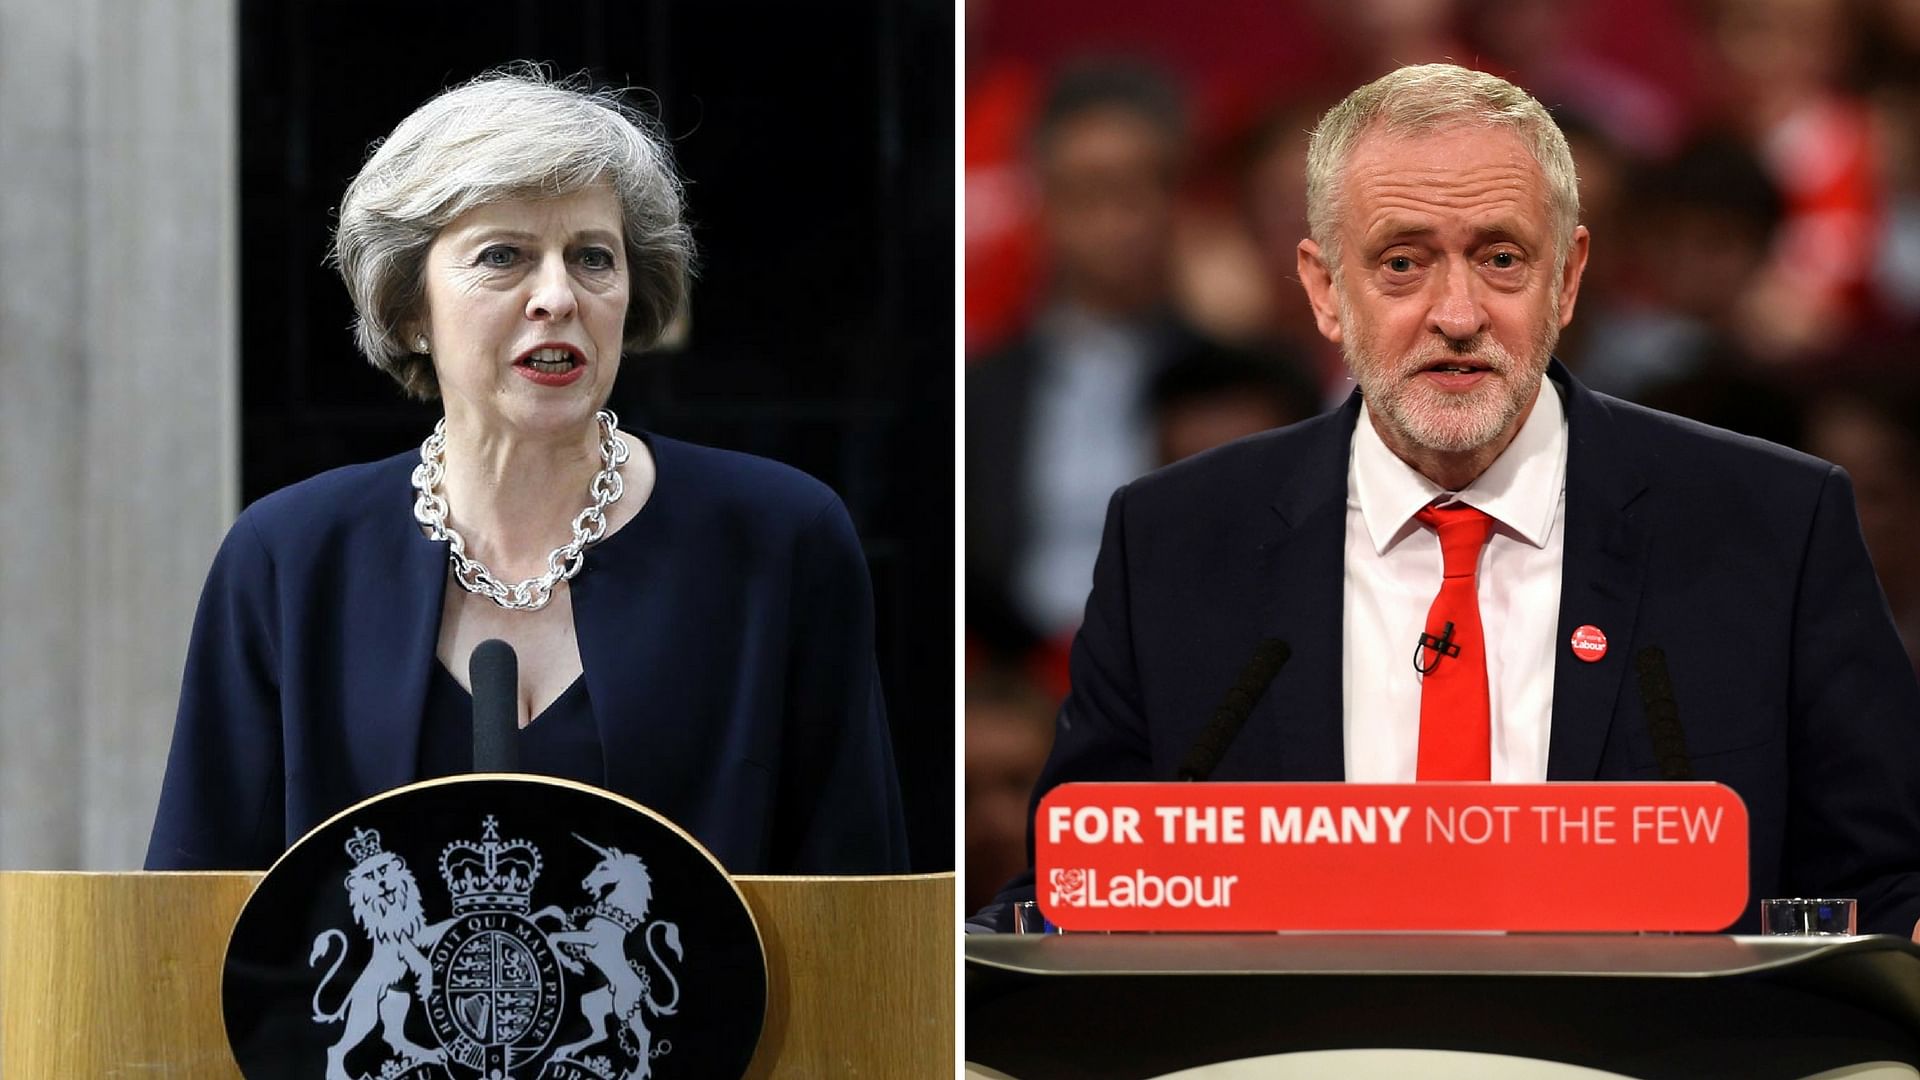 British Prime Minister Theresa May and Labour Party leader Jeremy Corbyn. (Photos: AP)